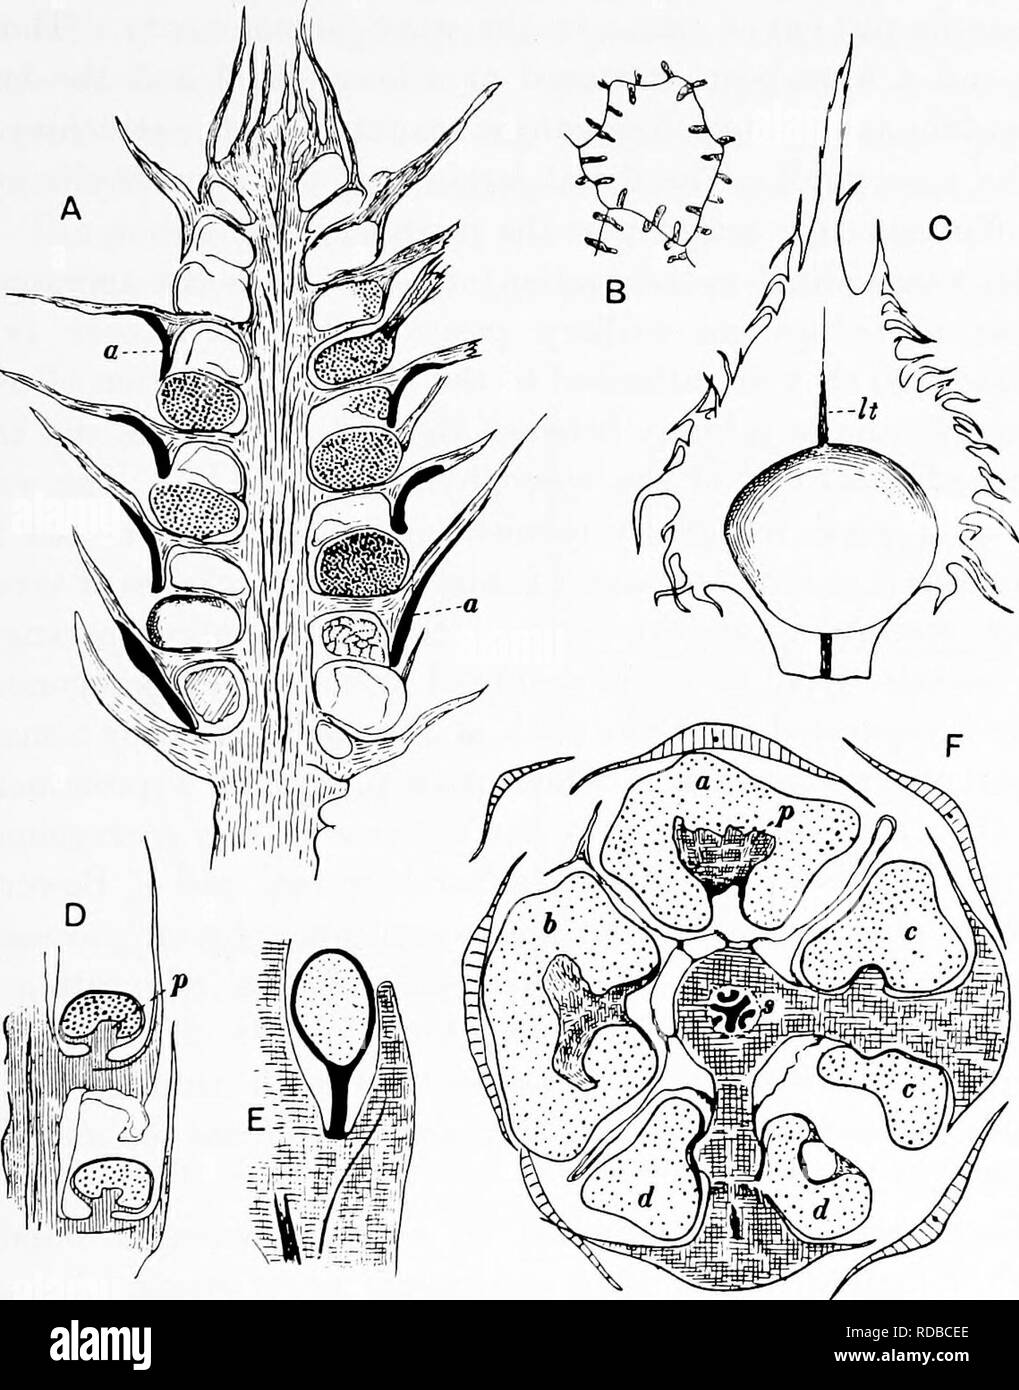 . Fossil plants : for students of botany and geology . Paleobotany. xiv] LYCOPODIUM 45 and the line of dehiscence is determined in some species at least by the occurrence of smaller cells in the wall. In. Fig. 126. A. Lycopodium cernuum, longitudinal section of strobilus ; a, band of lignified cells. B. L. cernuum. Cell from sporangium wall. C. L. cernuum. Sporophyll and sporangium ; It, vascular bundle. D. L. clavatum. Part of radial longitudinal section of strobilus; p, sterile tissue. E. L. Phlegmaria. Sporophyll and stalked sporangium. P. L. clavatum. Transverse section of strobilus; p, st Stock Photo